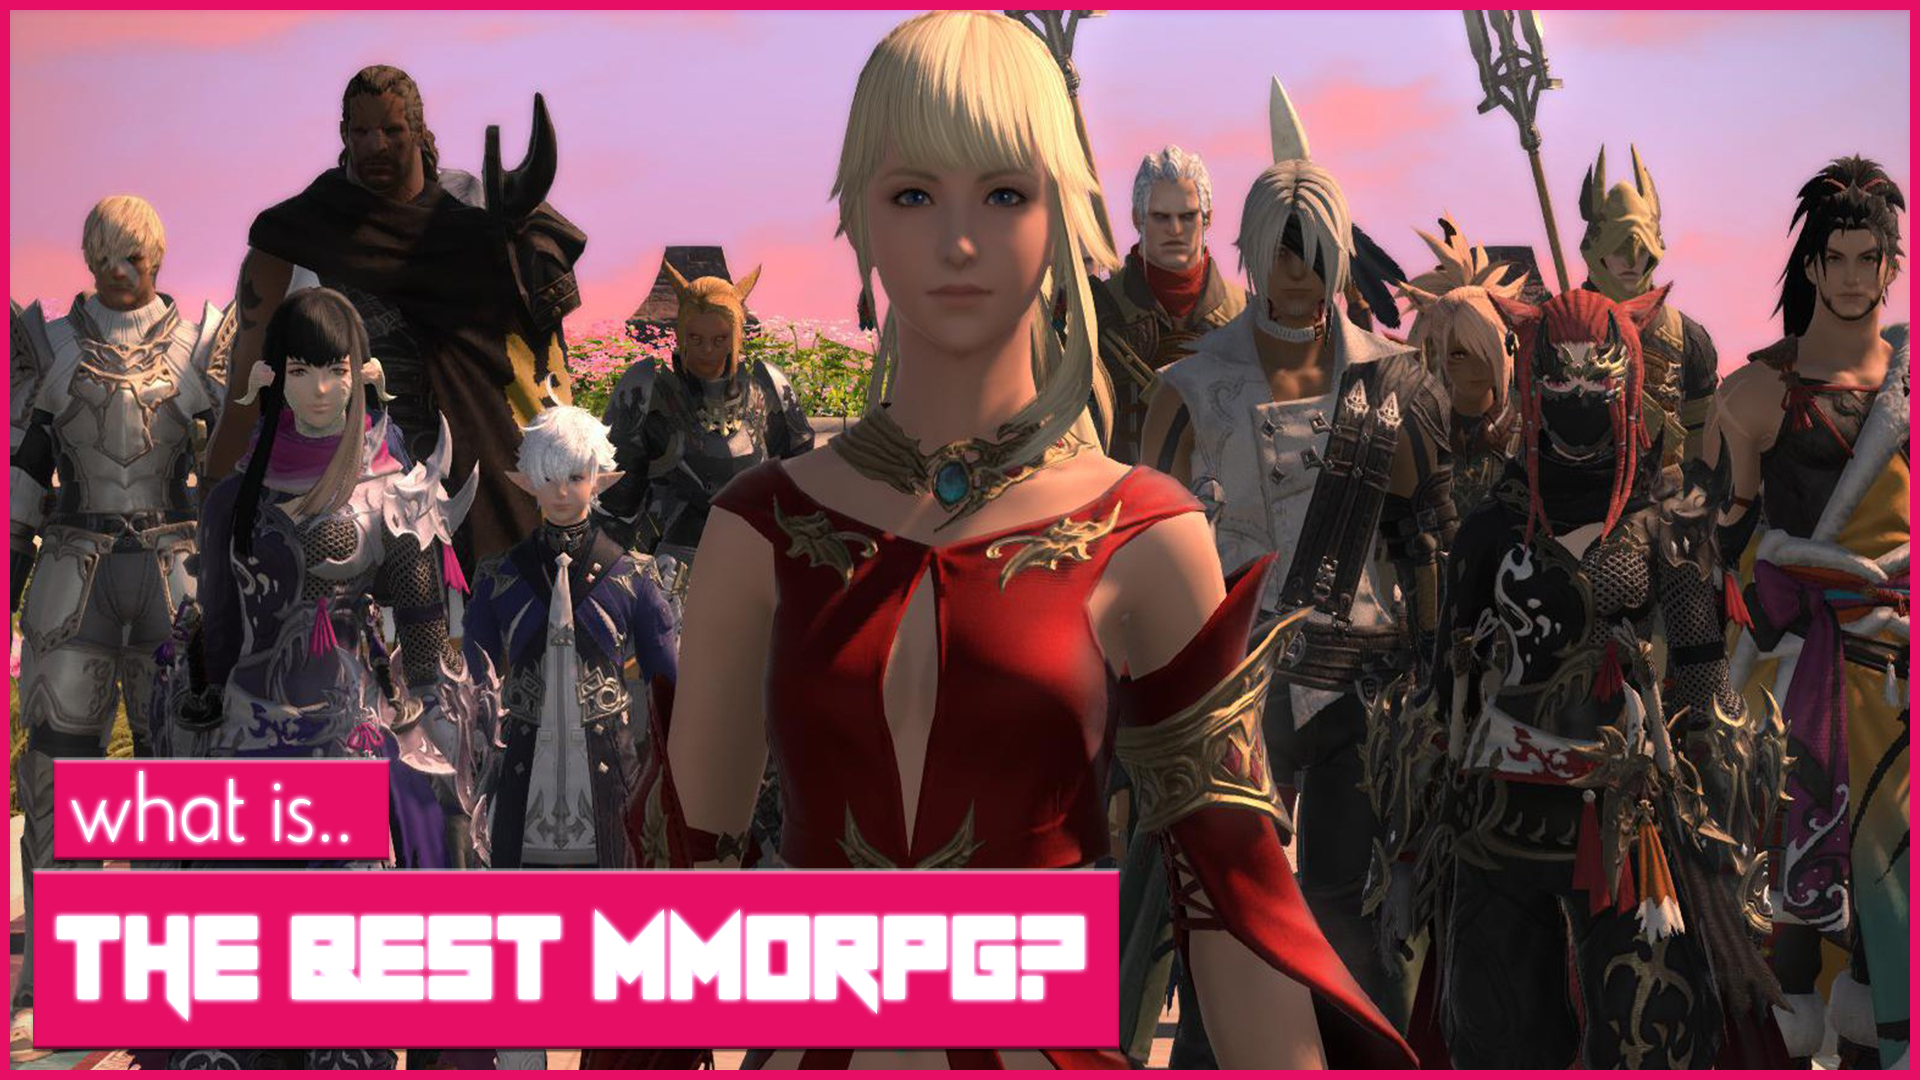 What Is The Best MMORPG In 2018? FFXIV, GW2, BDO, ESO, WOW - Look At The Top MMORPGs